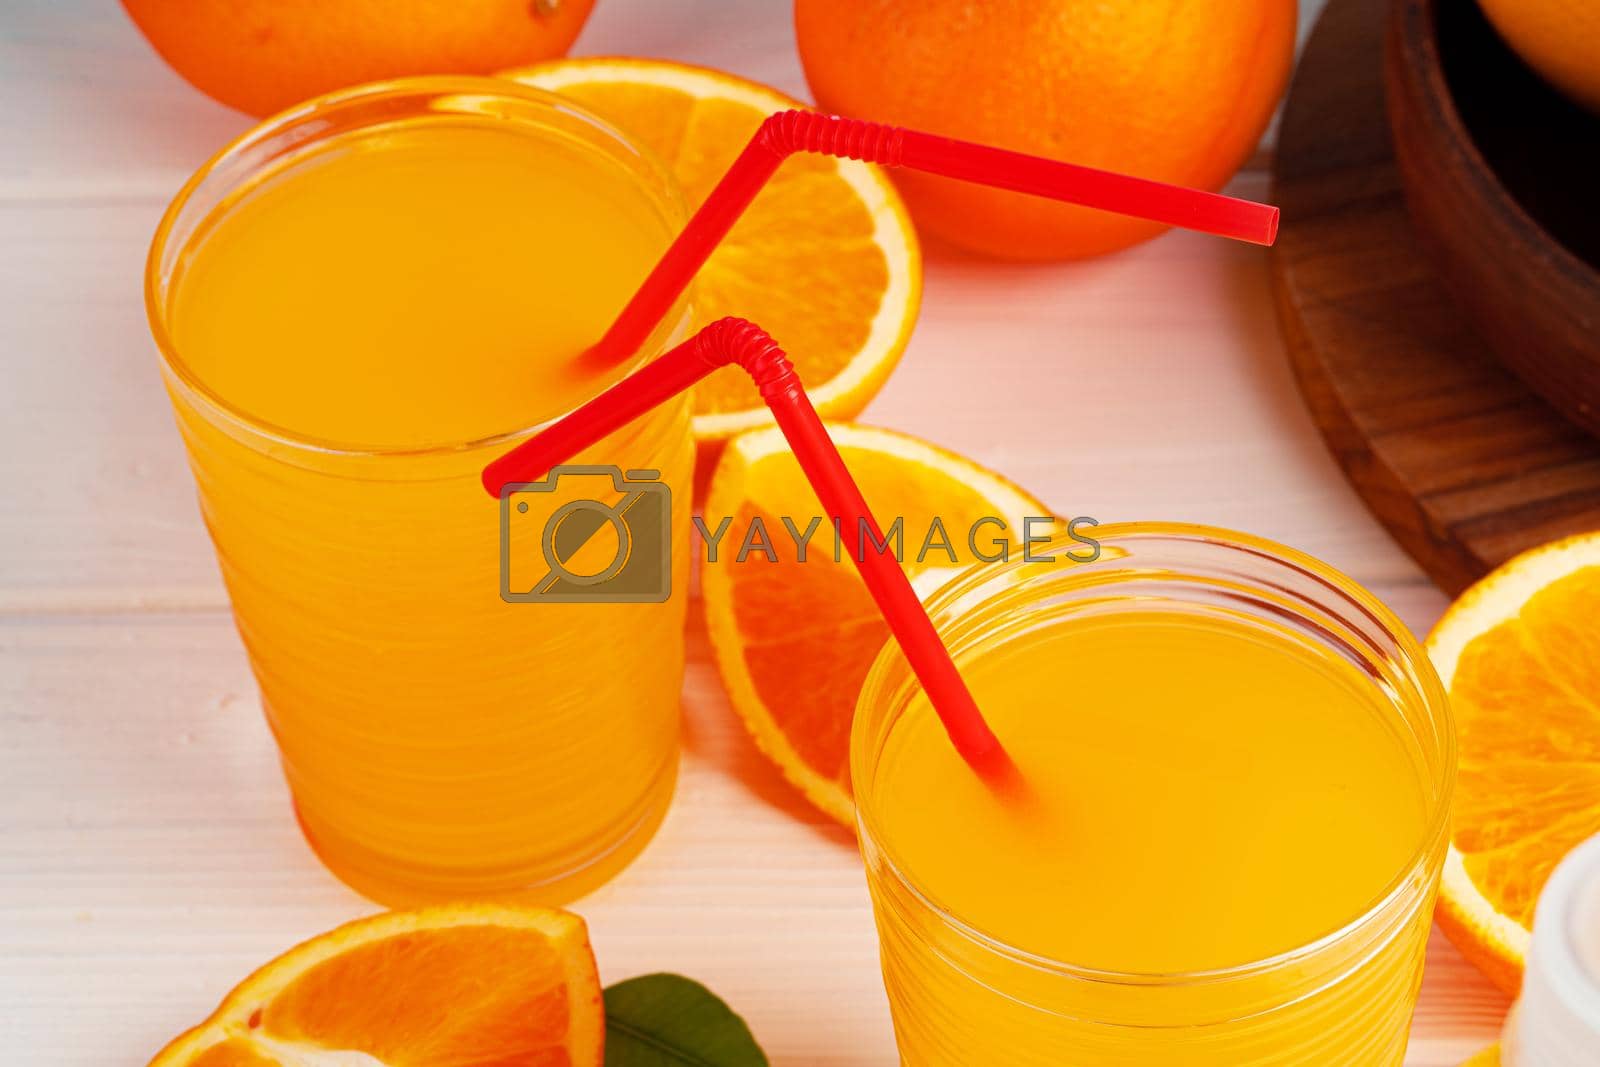 Royalty free image of Glass of orange juice with red straw on table by Fabrikasimf